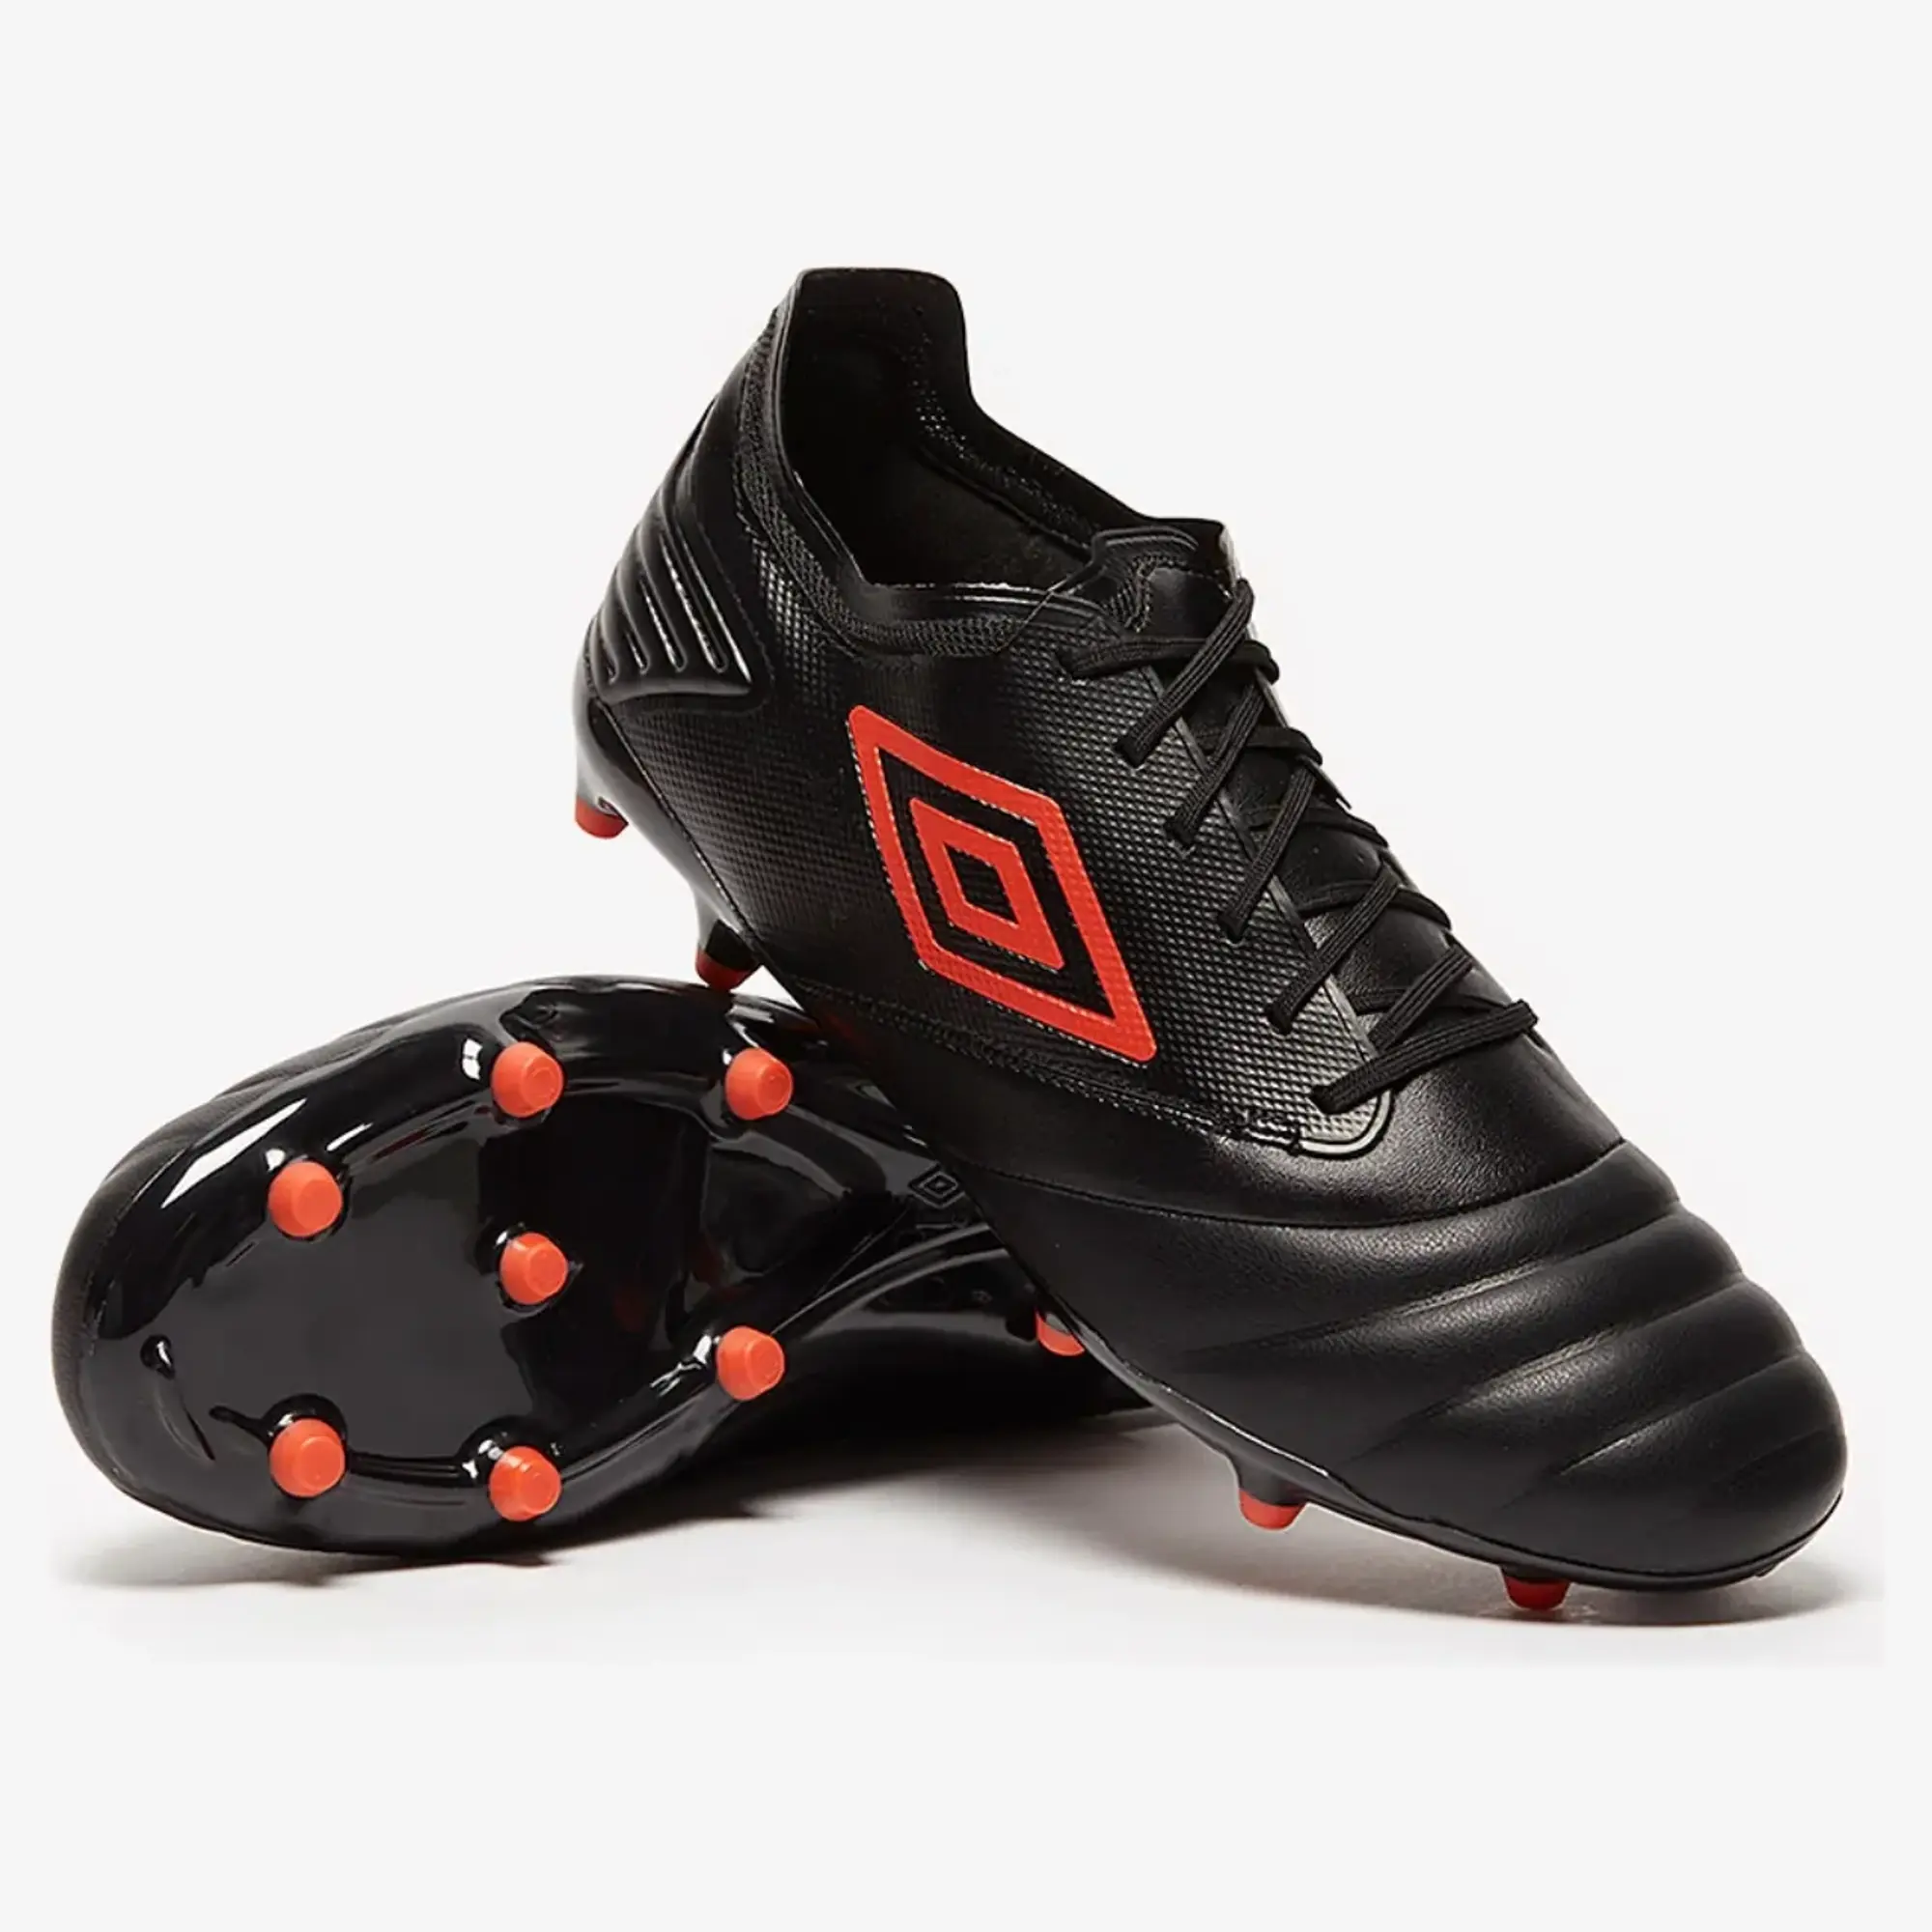 Umbro Tocco Premier Firm Ground Football Boots Mens - Multi